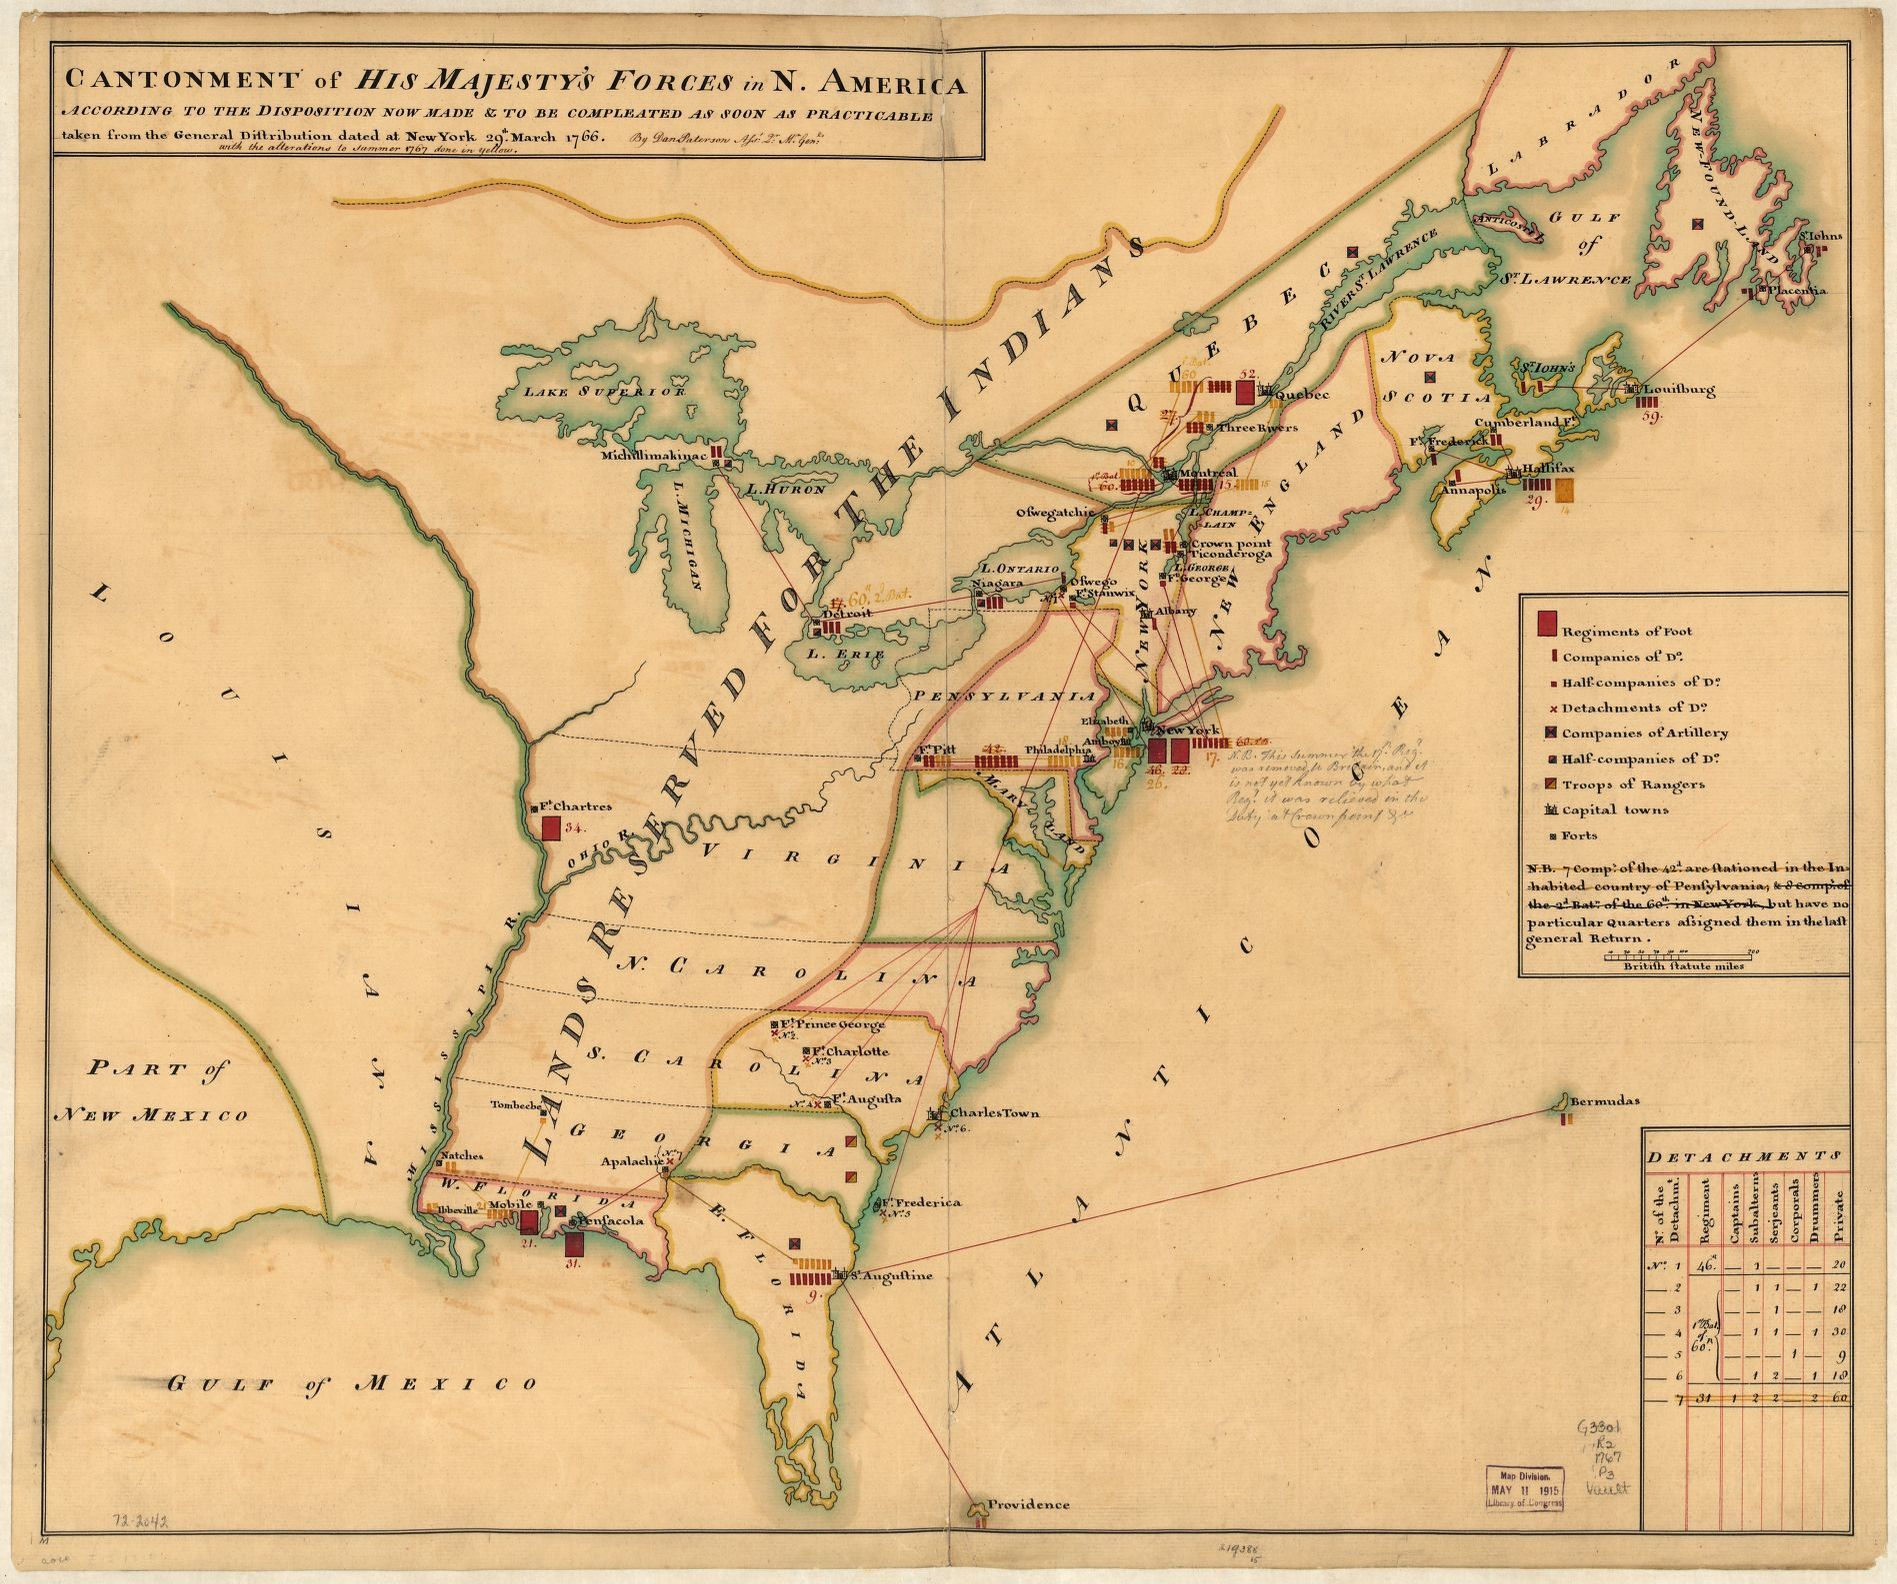 A 1767 map of the placement of British military forces in North America. Daniel Paterson, Cantonment of His Majesty's forces in N. America according to the disposition now made & to be compleated as soon as practicable taken from the general distribution dated at New York, 29th. March, 1767 (Library of Congress).